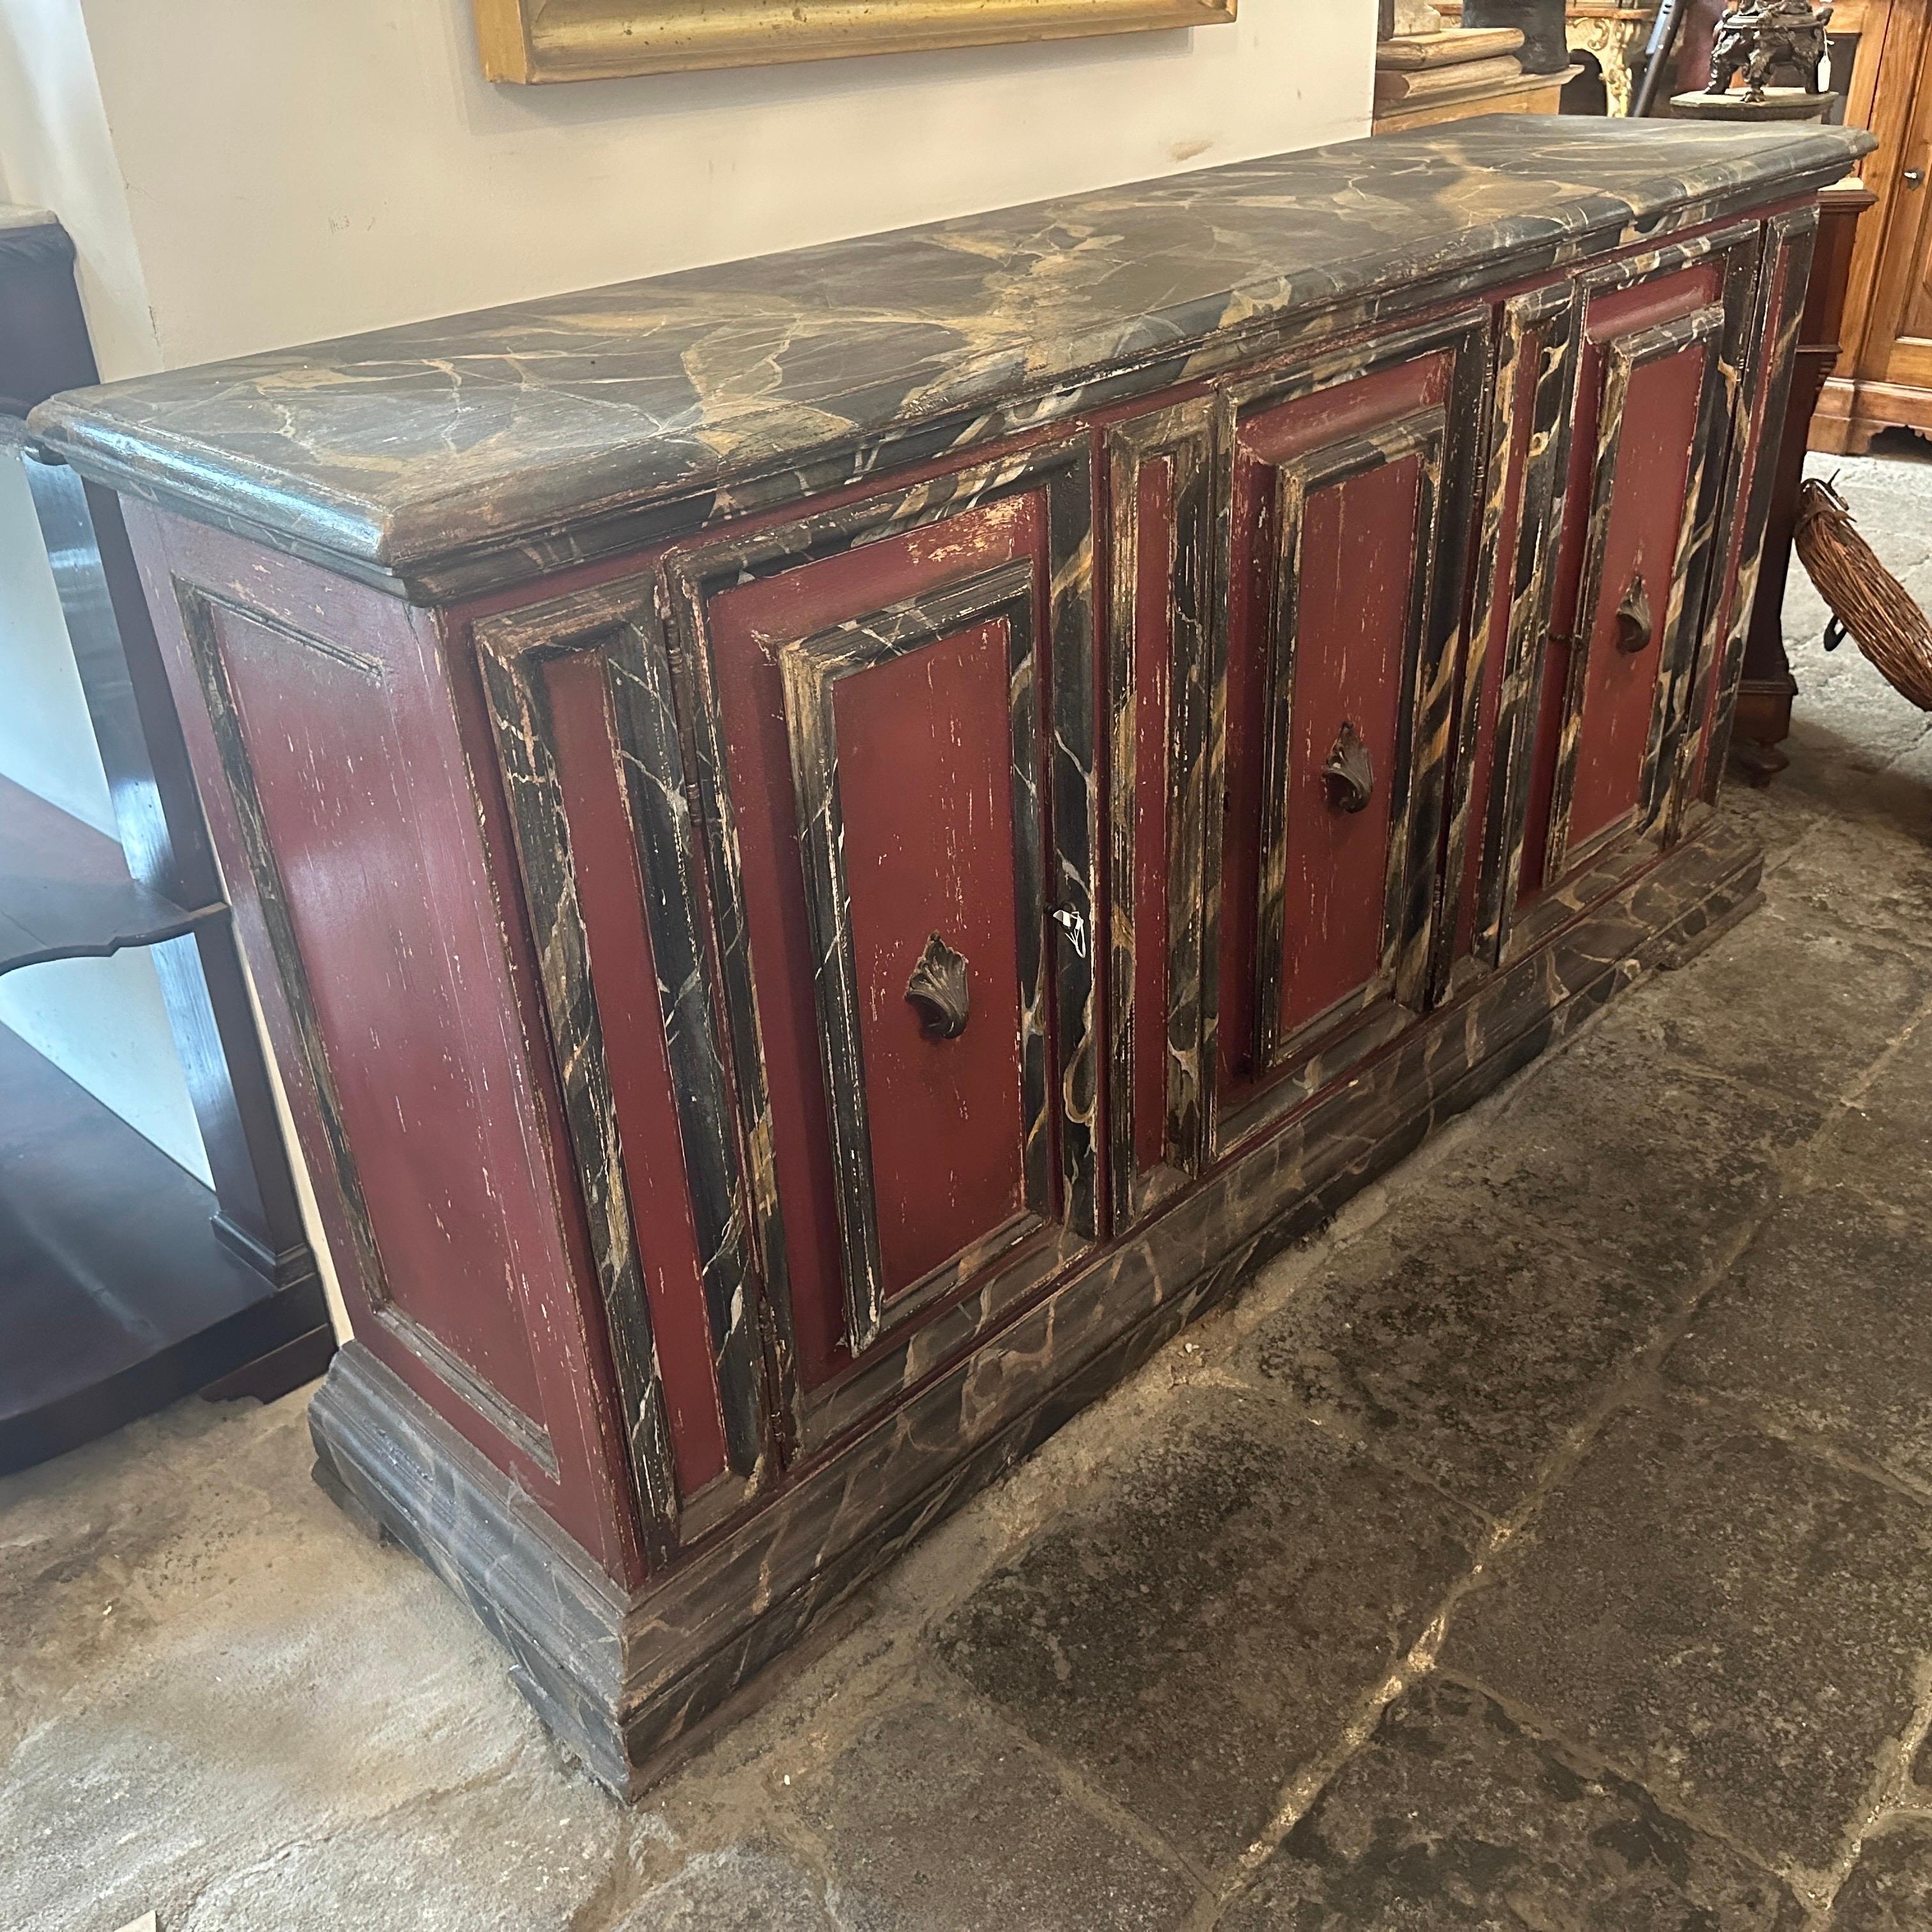 A lacquered wood italian buffet in original conditions and patina. The top and the frames are lacquered as fake marble Portoro, the other parties are in an elegant burgundy red. It's a furniture with an hot personality and it can be used in classic